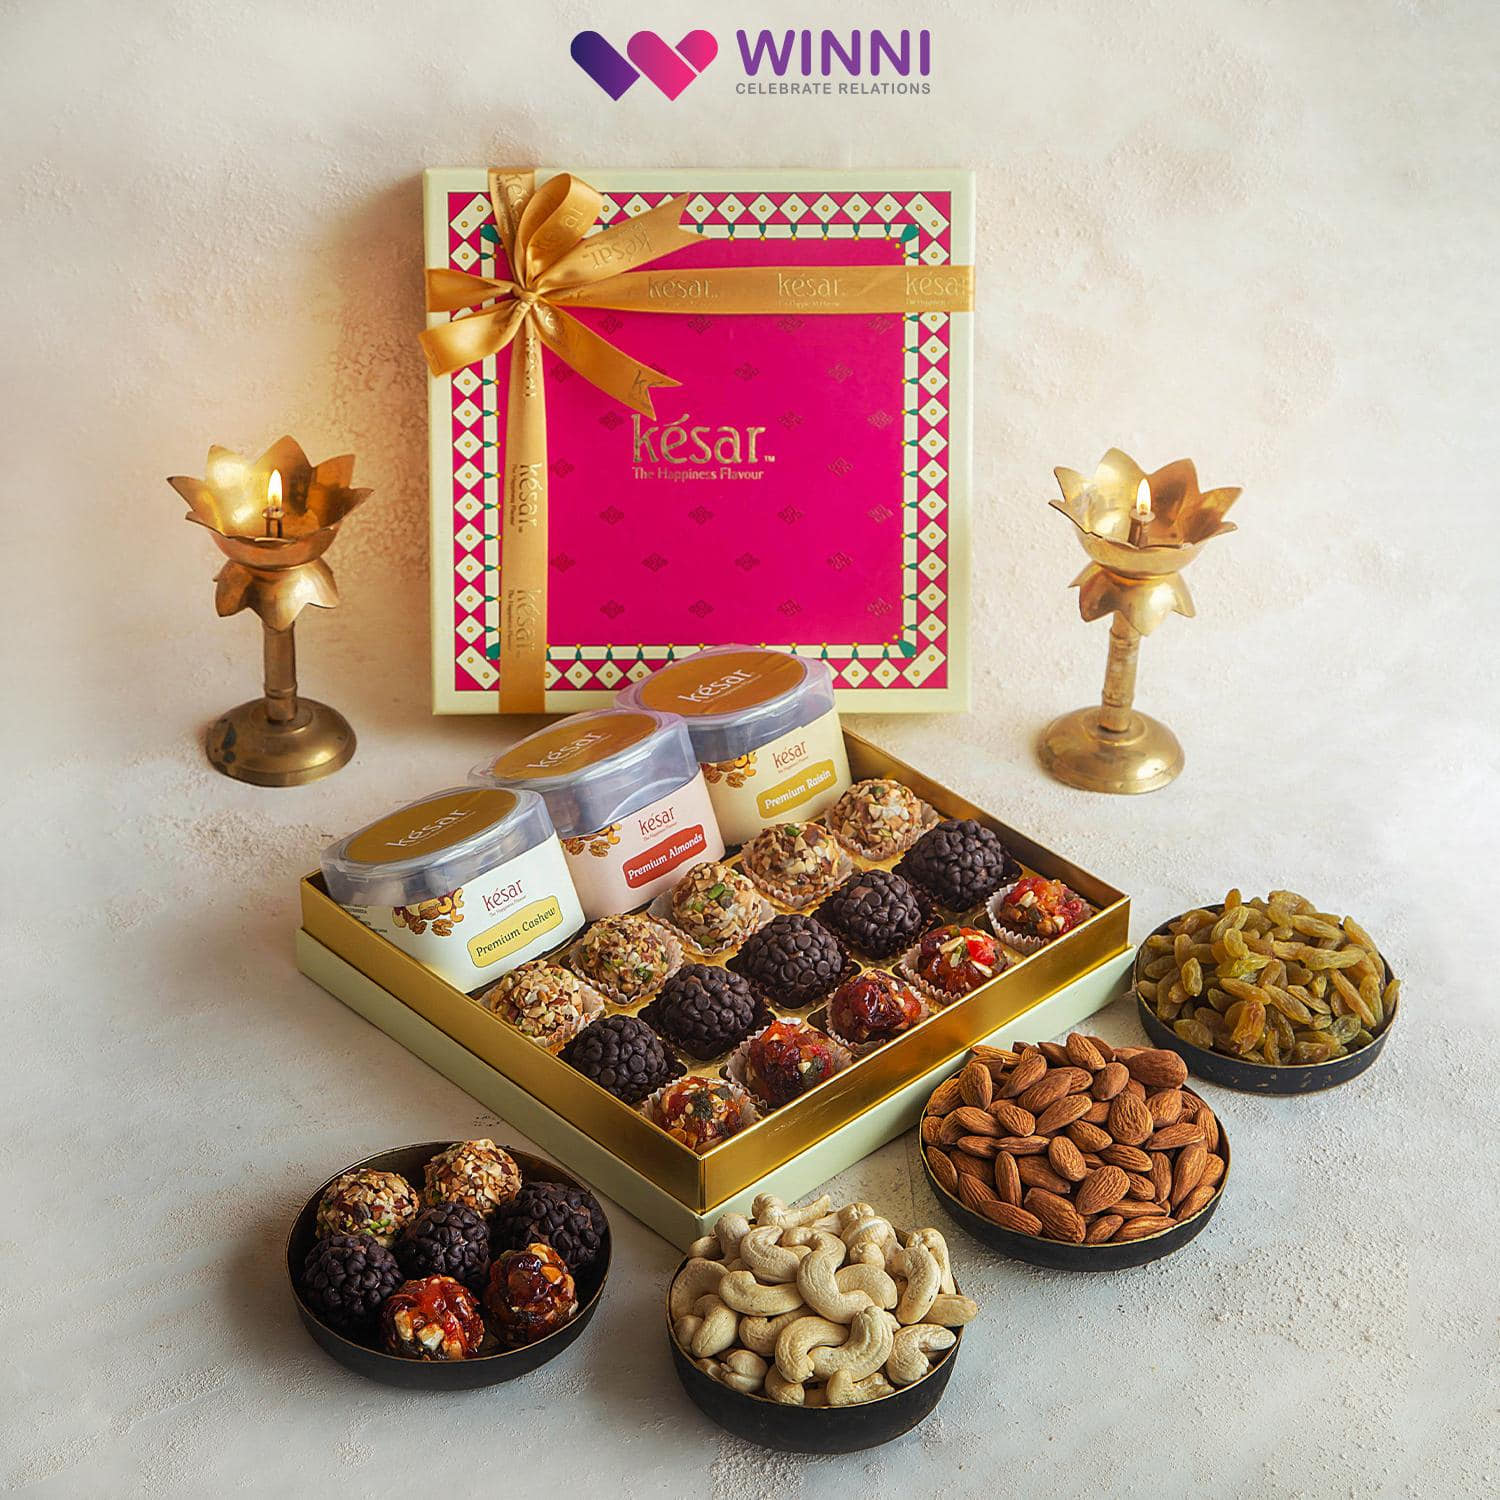 Bhai Dooj Tika Set for Brother Sister Mix Dry Fruits Combo Pack (Almonds,  Pista, Cashew, Raisins 100g Each) - Diwali Gifts Hamper for Family Friends  Corporate Employees Staff Clients : Amazon.in: Grocery